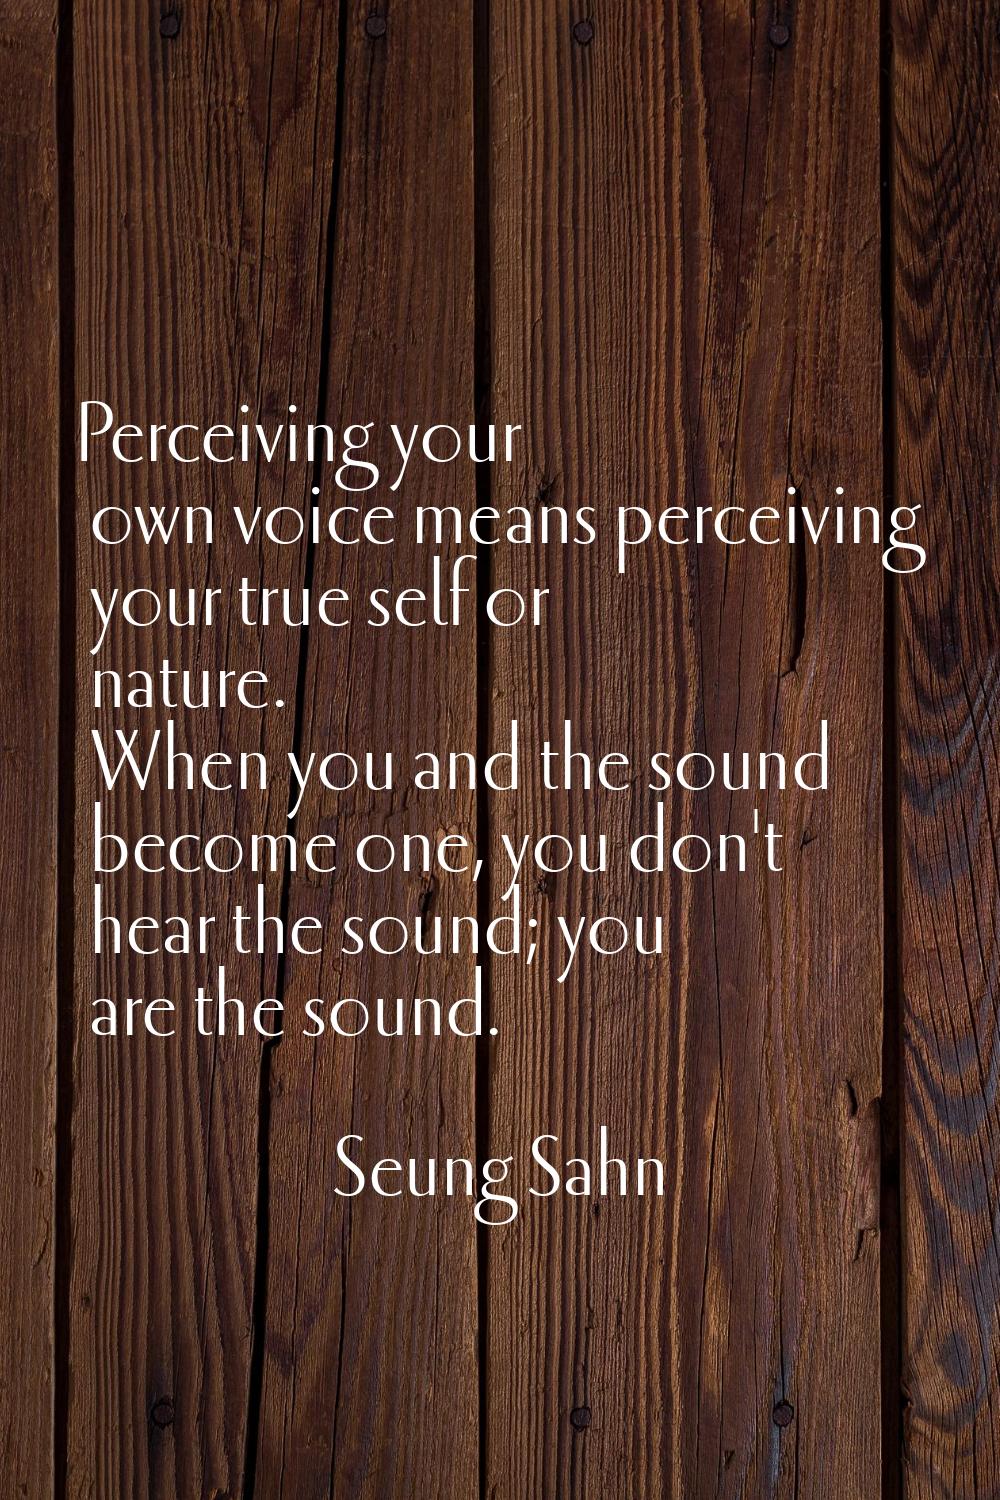 Perceiving your own voice means perceiving your true self or nature. When you and the sound become 